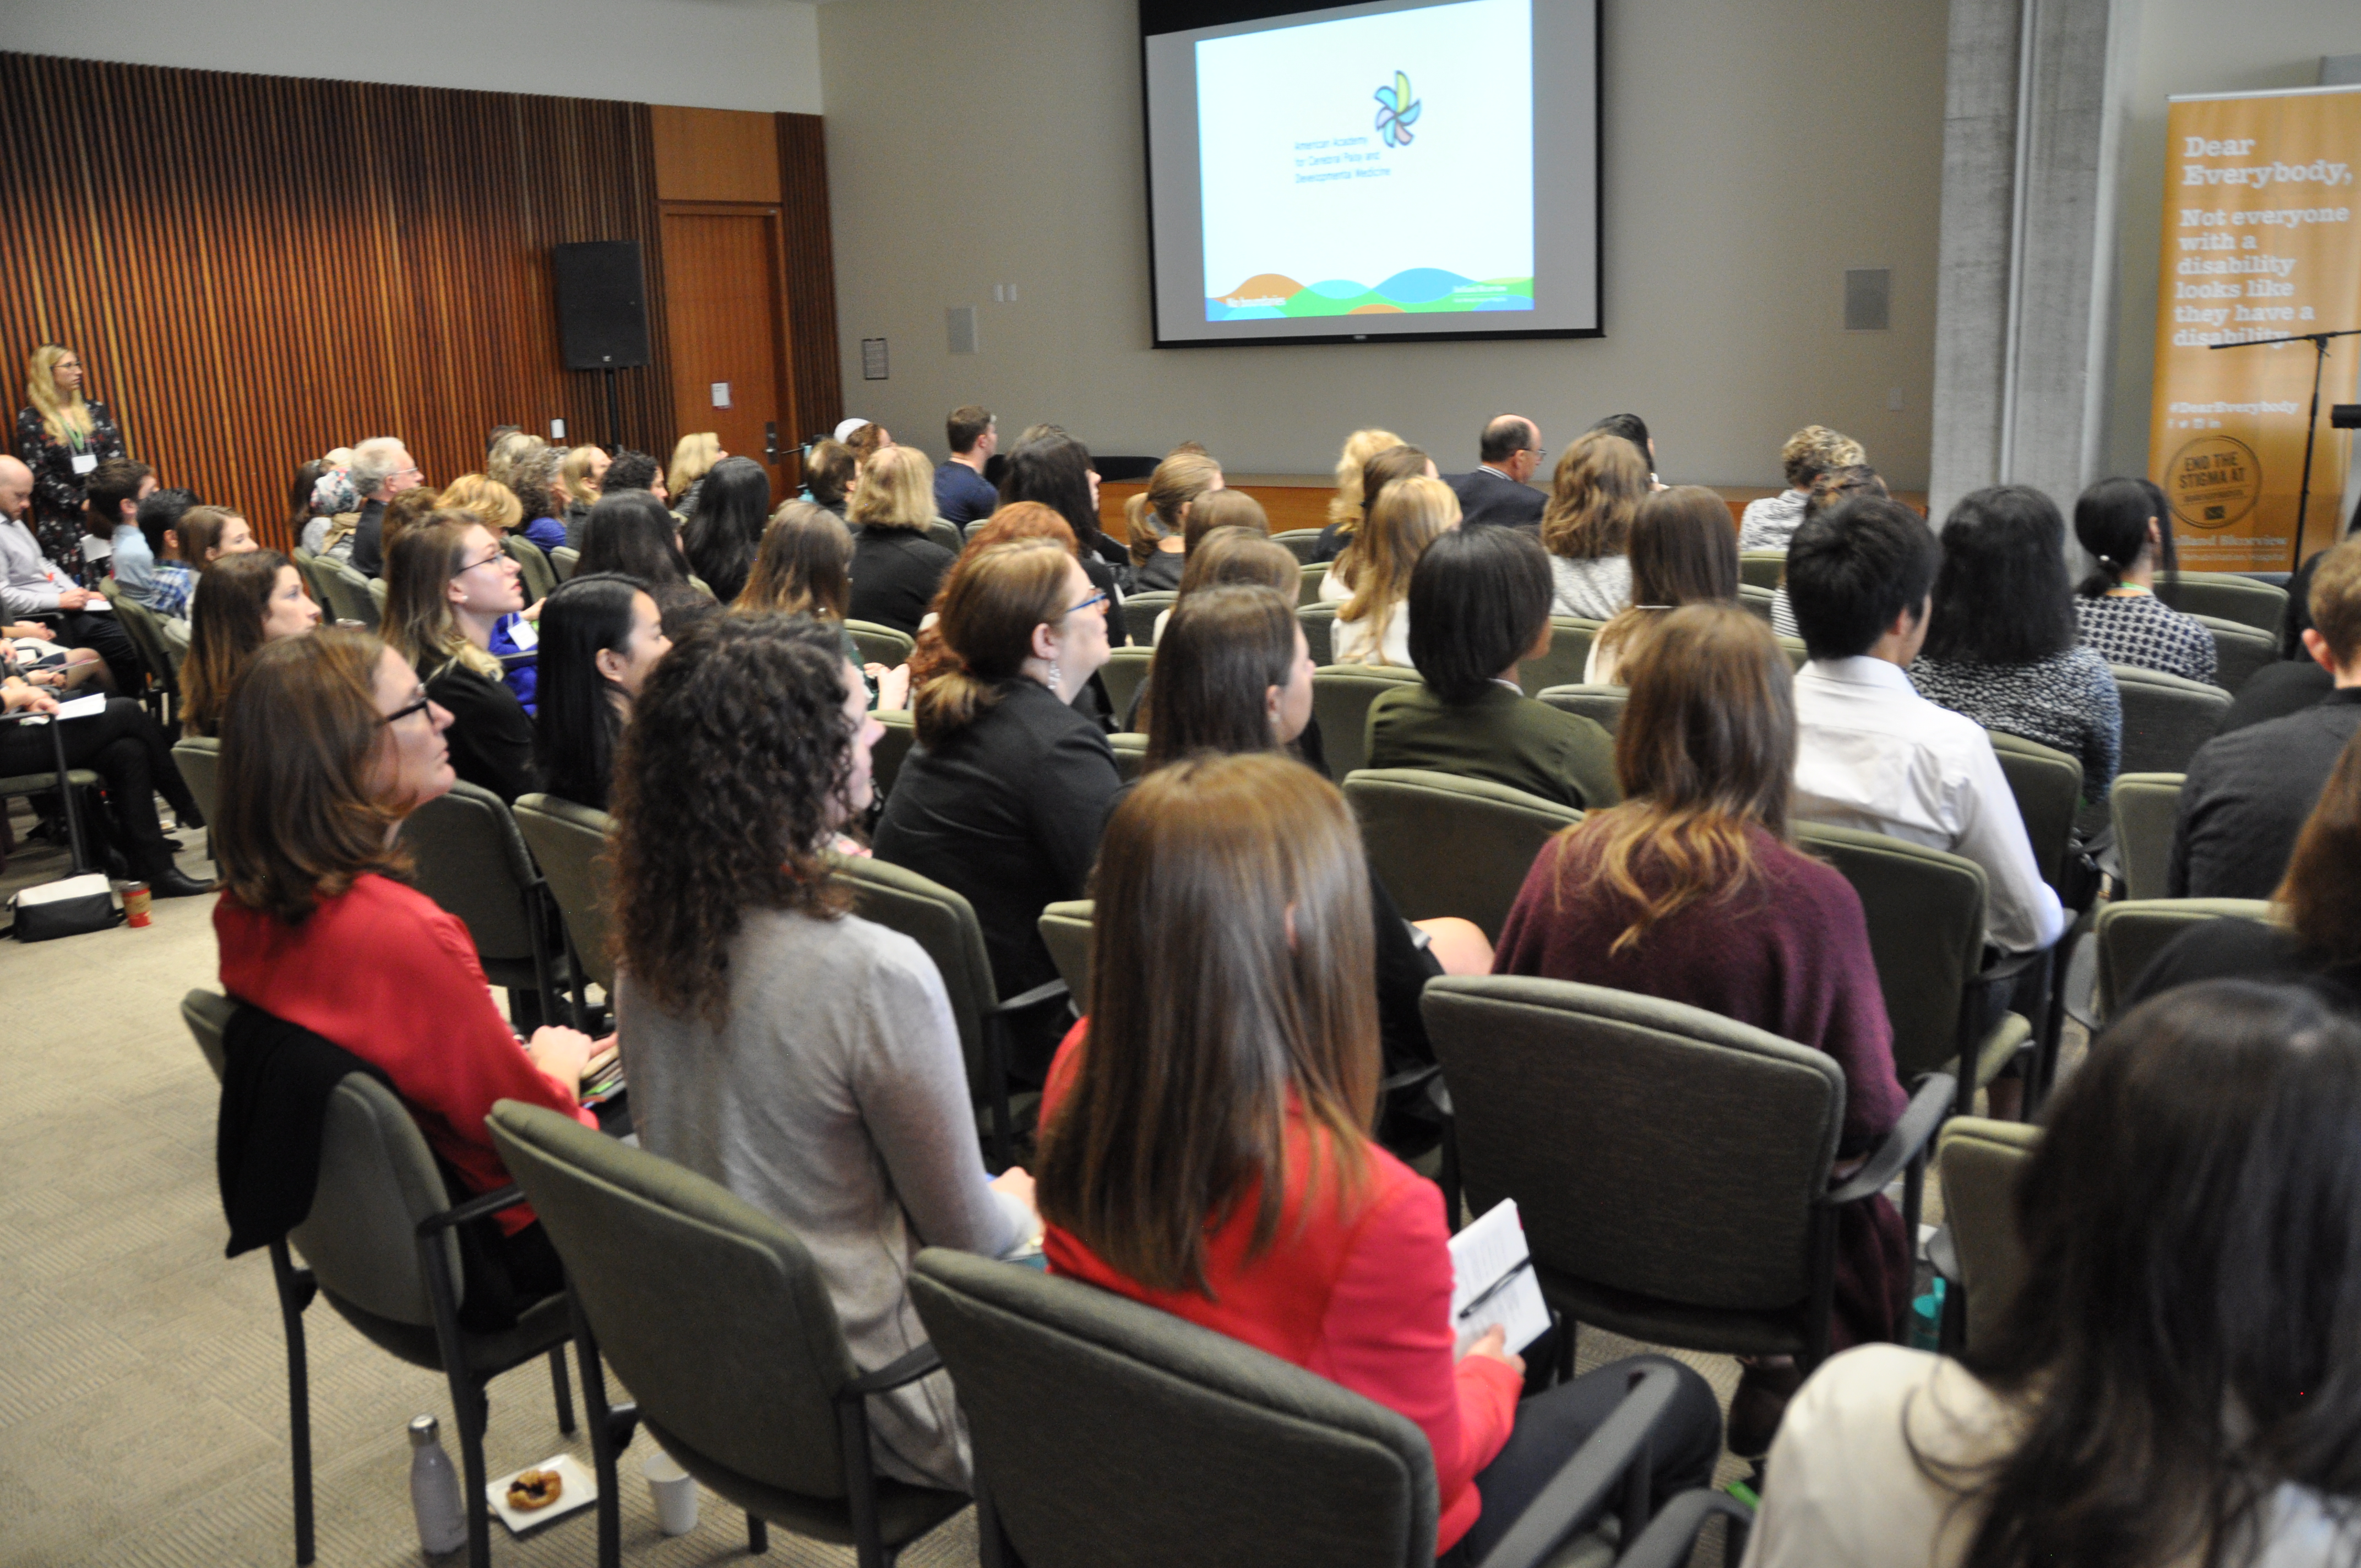 Audience captivated by engaging research talks